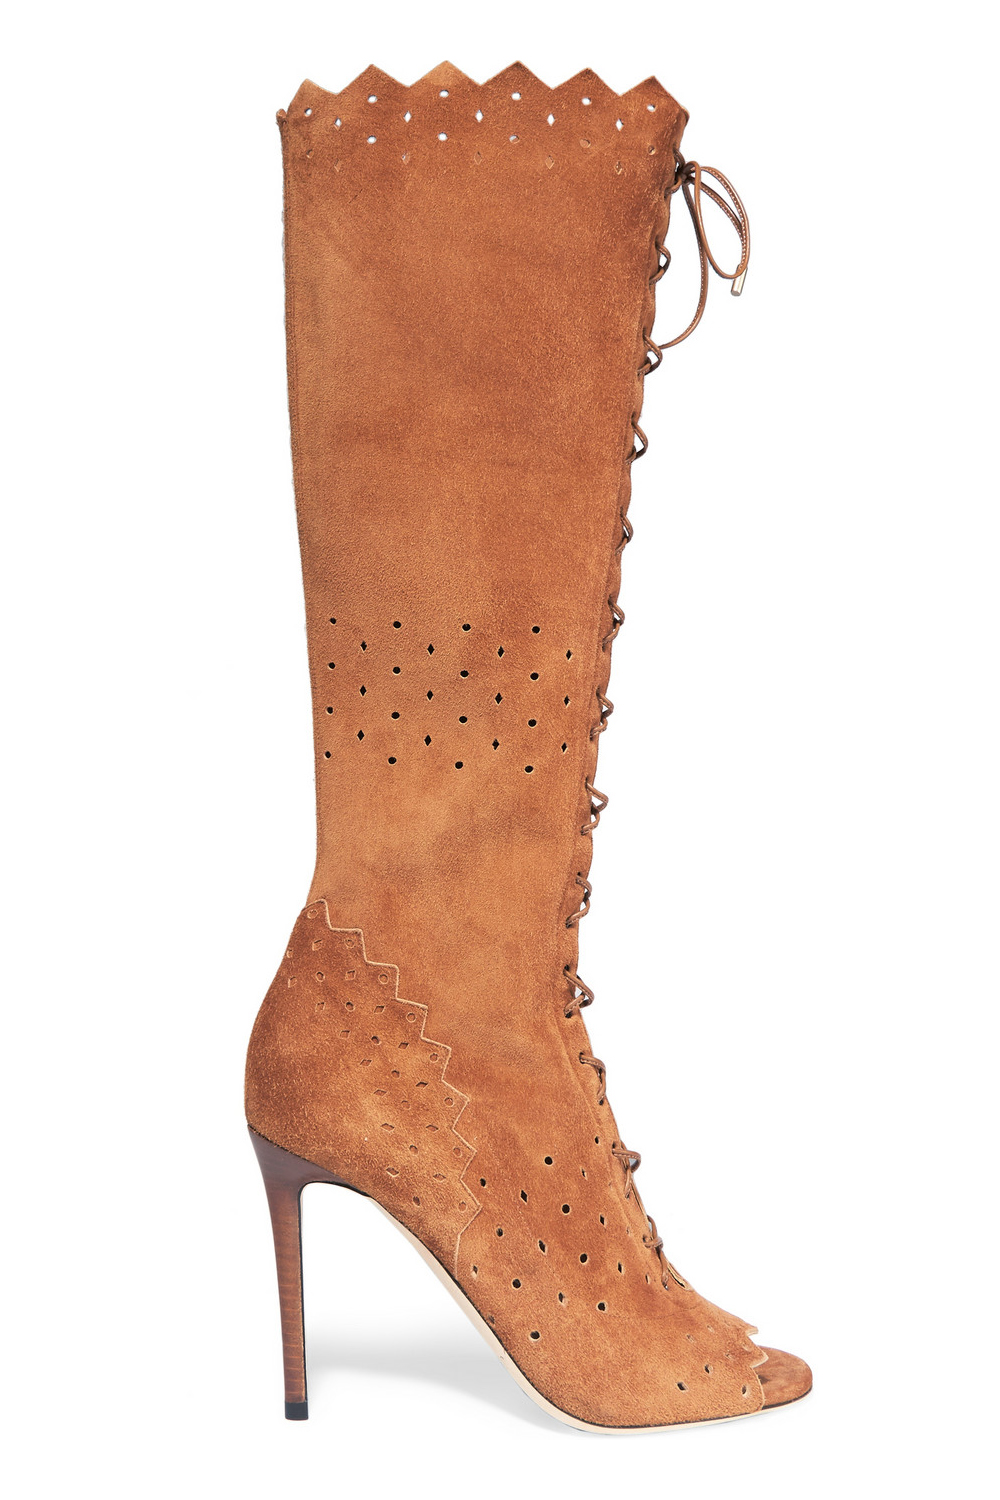 Jimmy Choo boots, approx $2,811, from Net-a-porter.com.